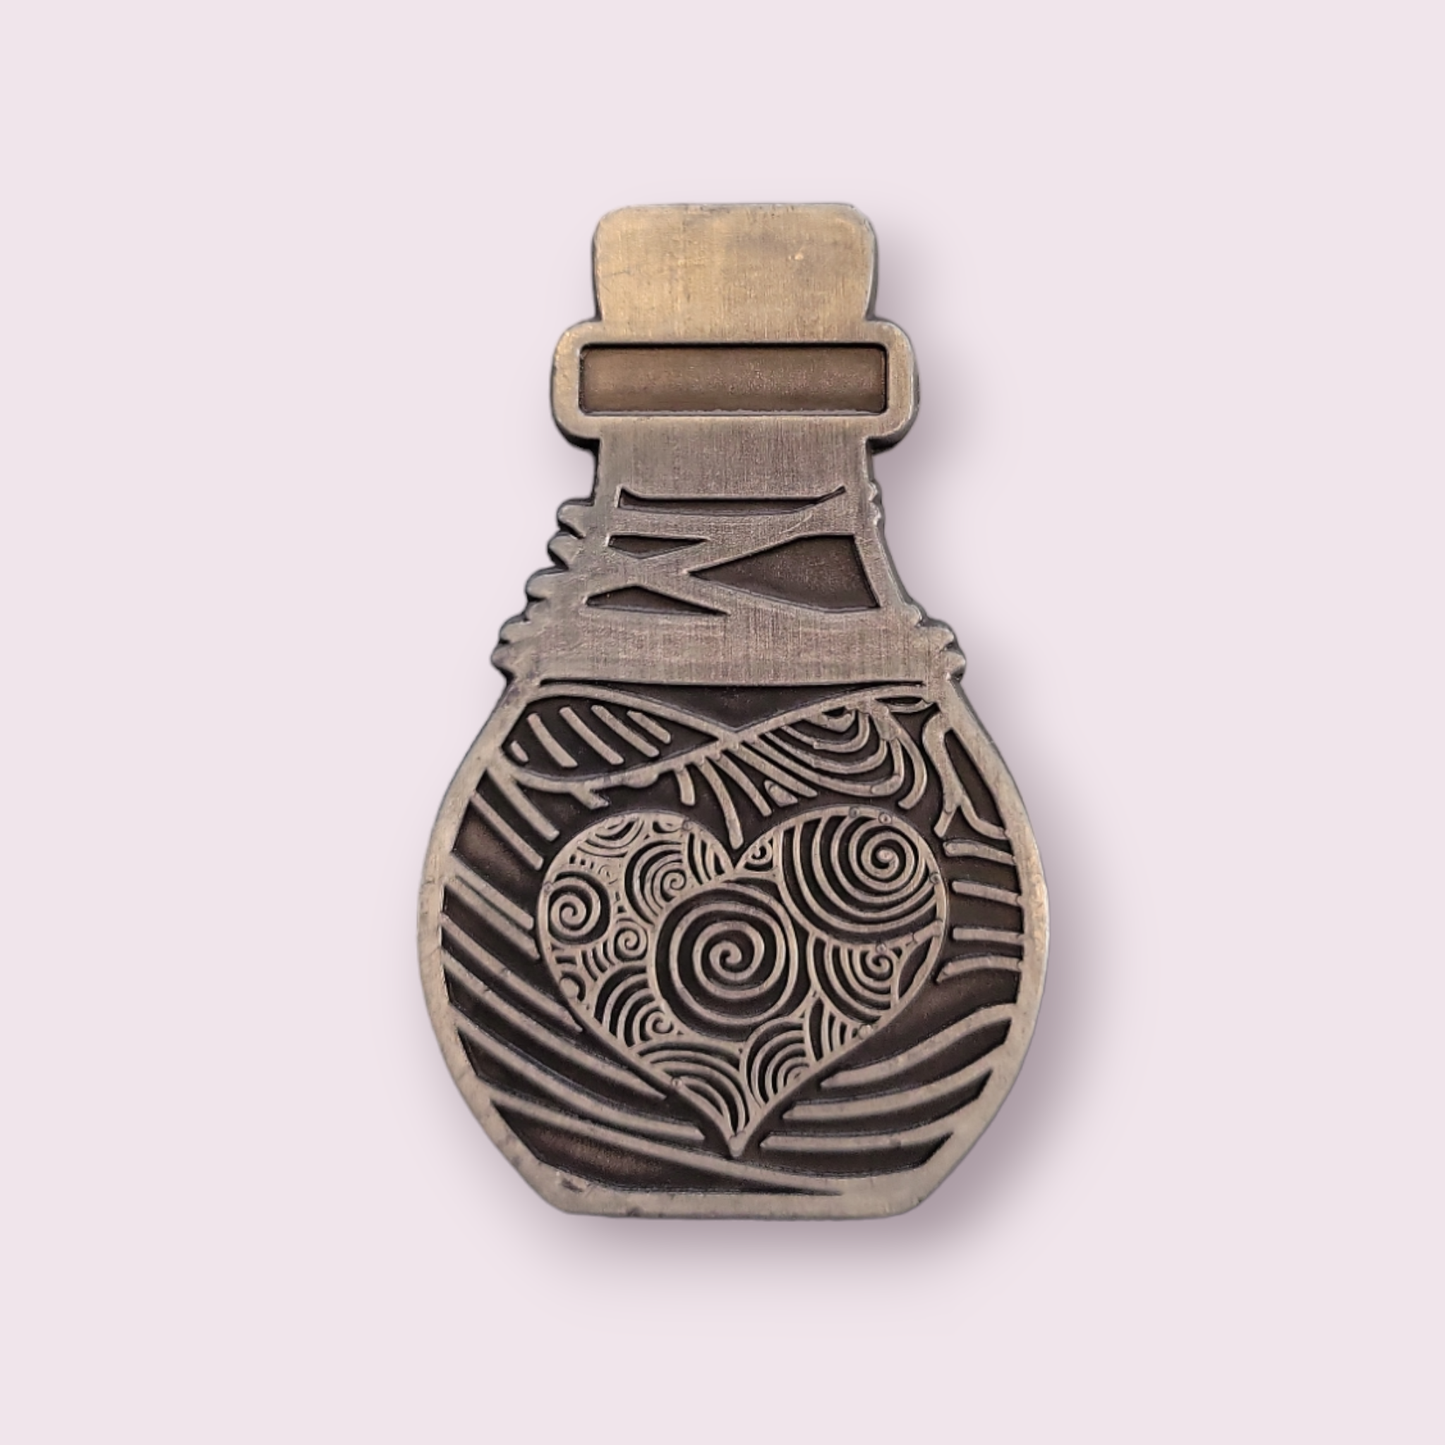 Bundle - 1 x Solid Metal D2 Coin Featuring a Life and Death Potion Bottle, 1 x Holographic Sticker, 1 x Vinyl D20 Sticker